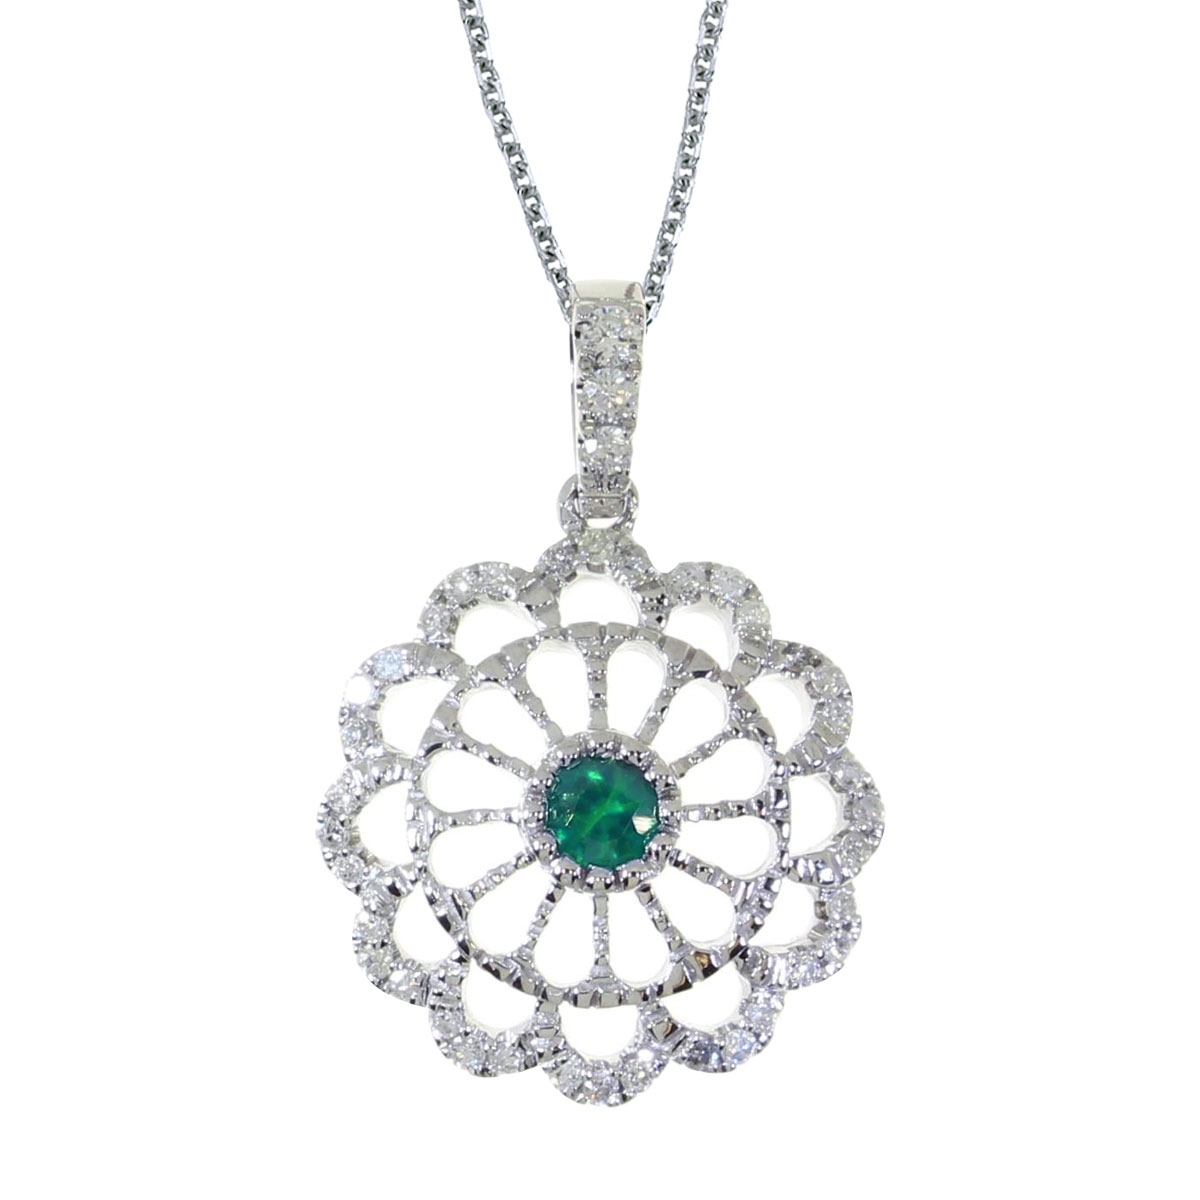 This beautiful 14k white gold pendant features a bright 3.5 mm round emerald and .05 carats of sh...